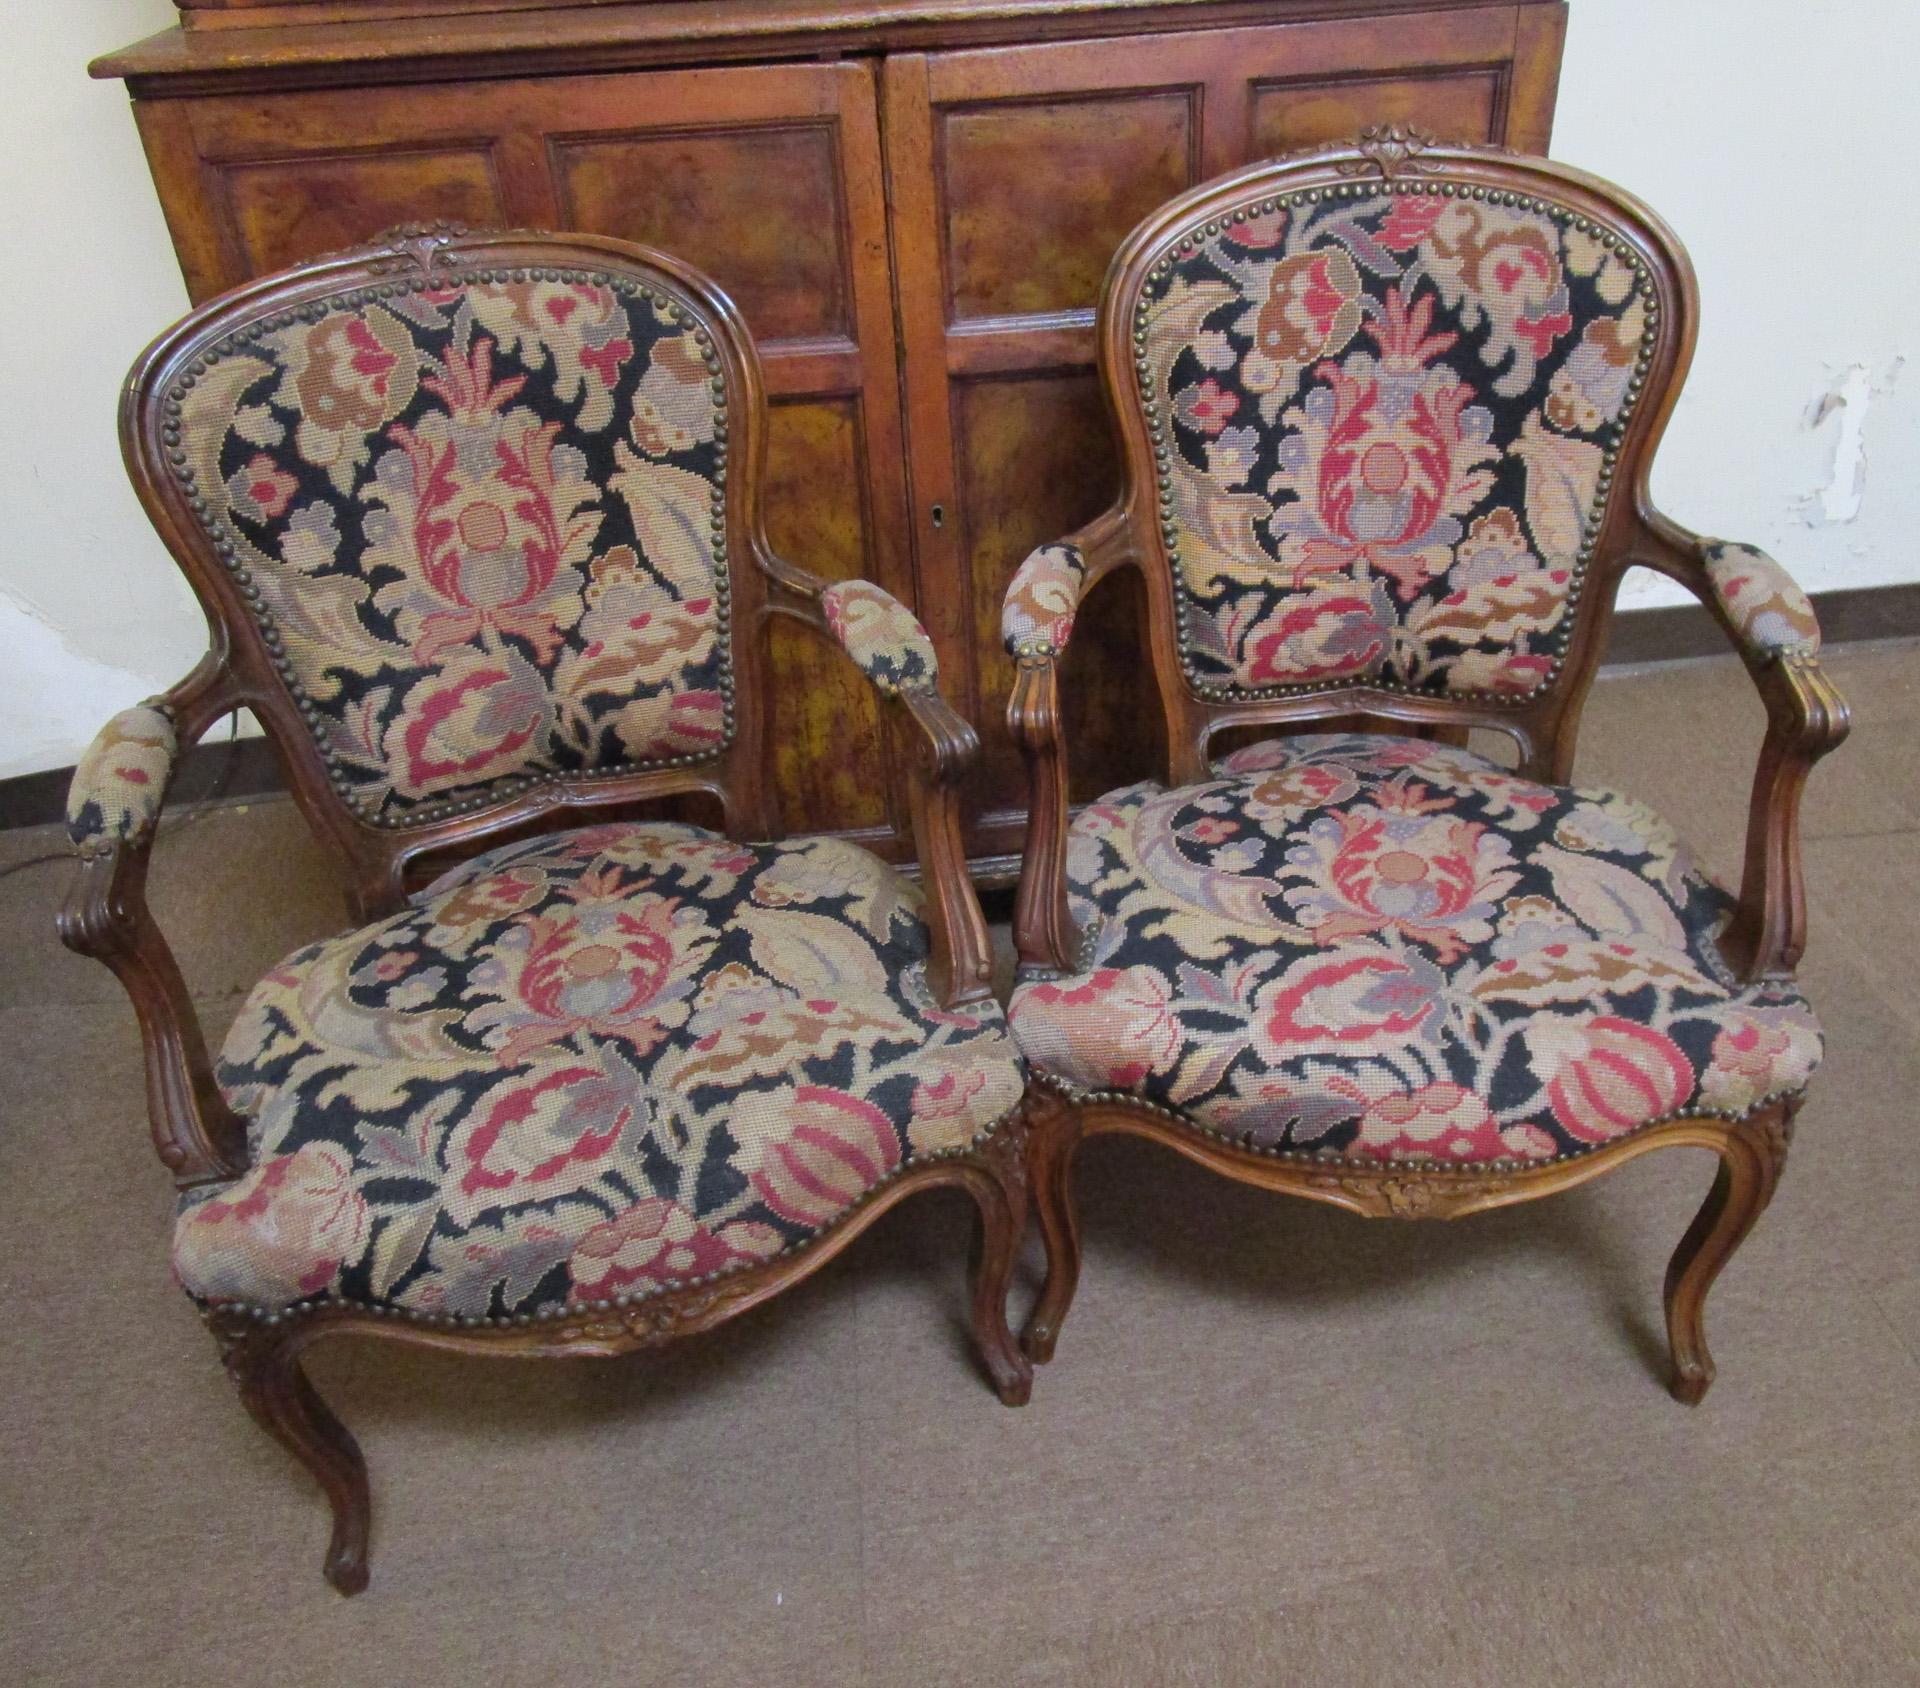 19thc Louis XVI Style Carved Walnut Fauteuils with Needlepoint Upholstery For Sale 5